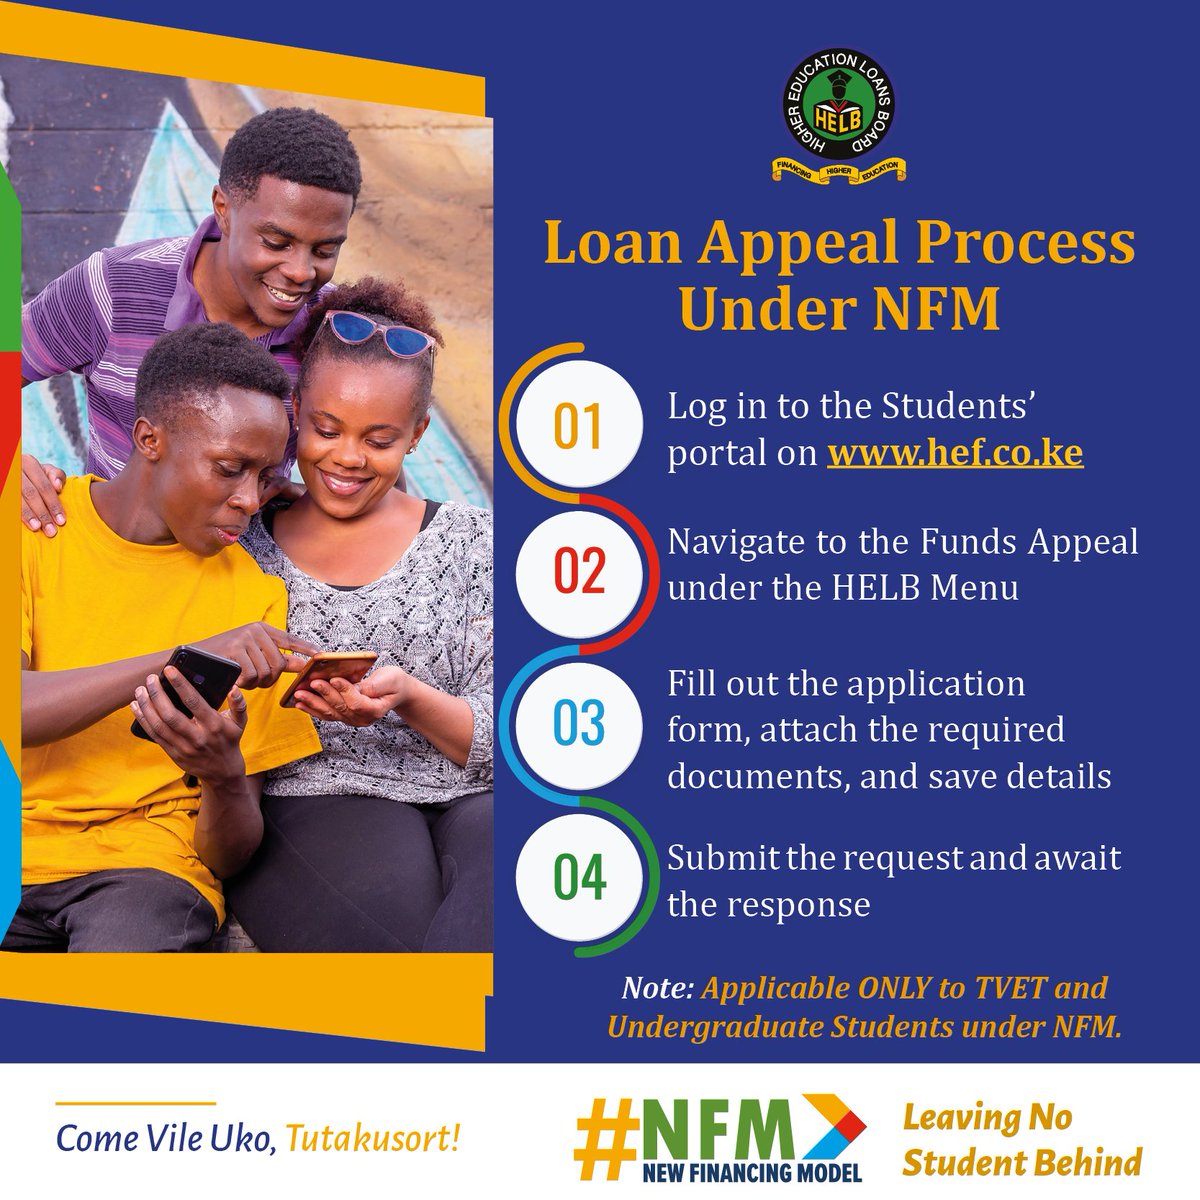 If your allocated HELB loan is insufficient, don’t worry! Our appeal process gives you another go. Click here to appeal: portal.hef.co.ke.